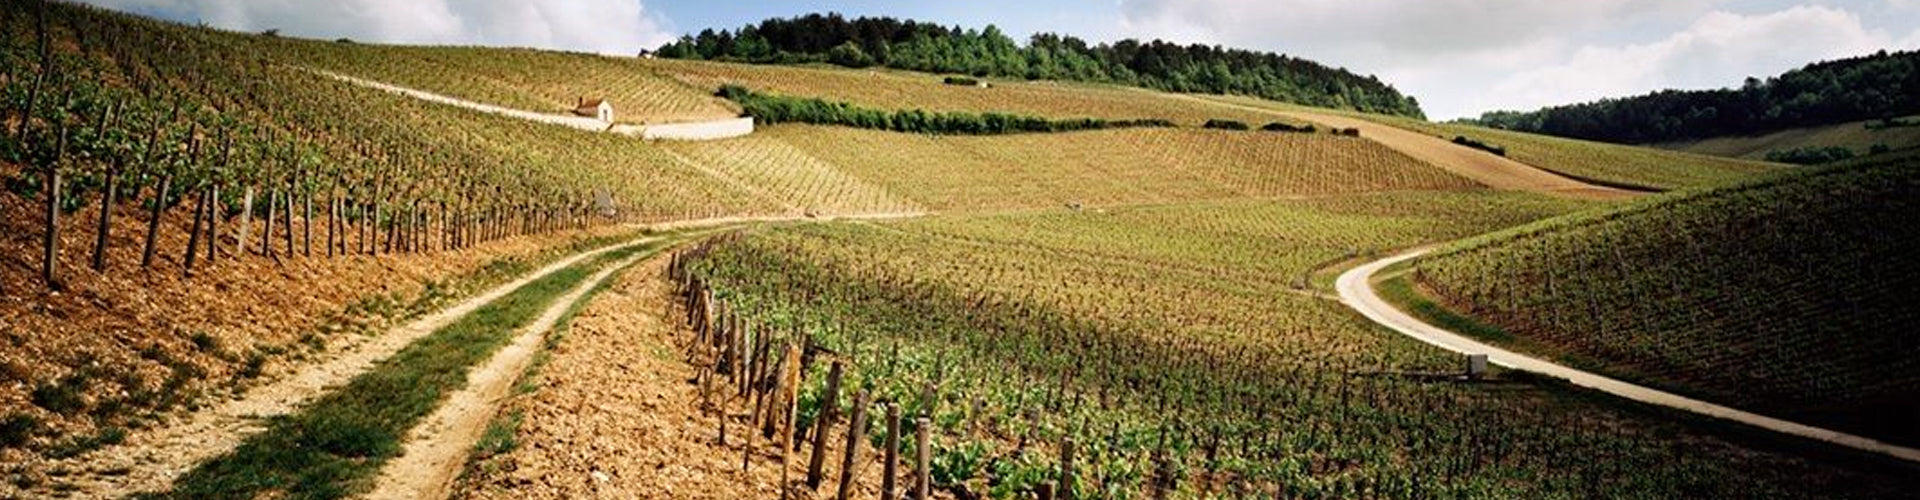 The Vineyards of Chablis in Burgundy, France